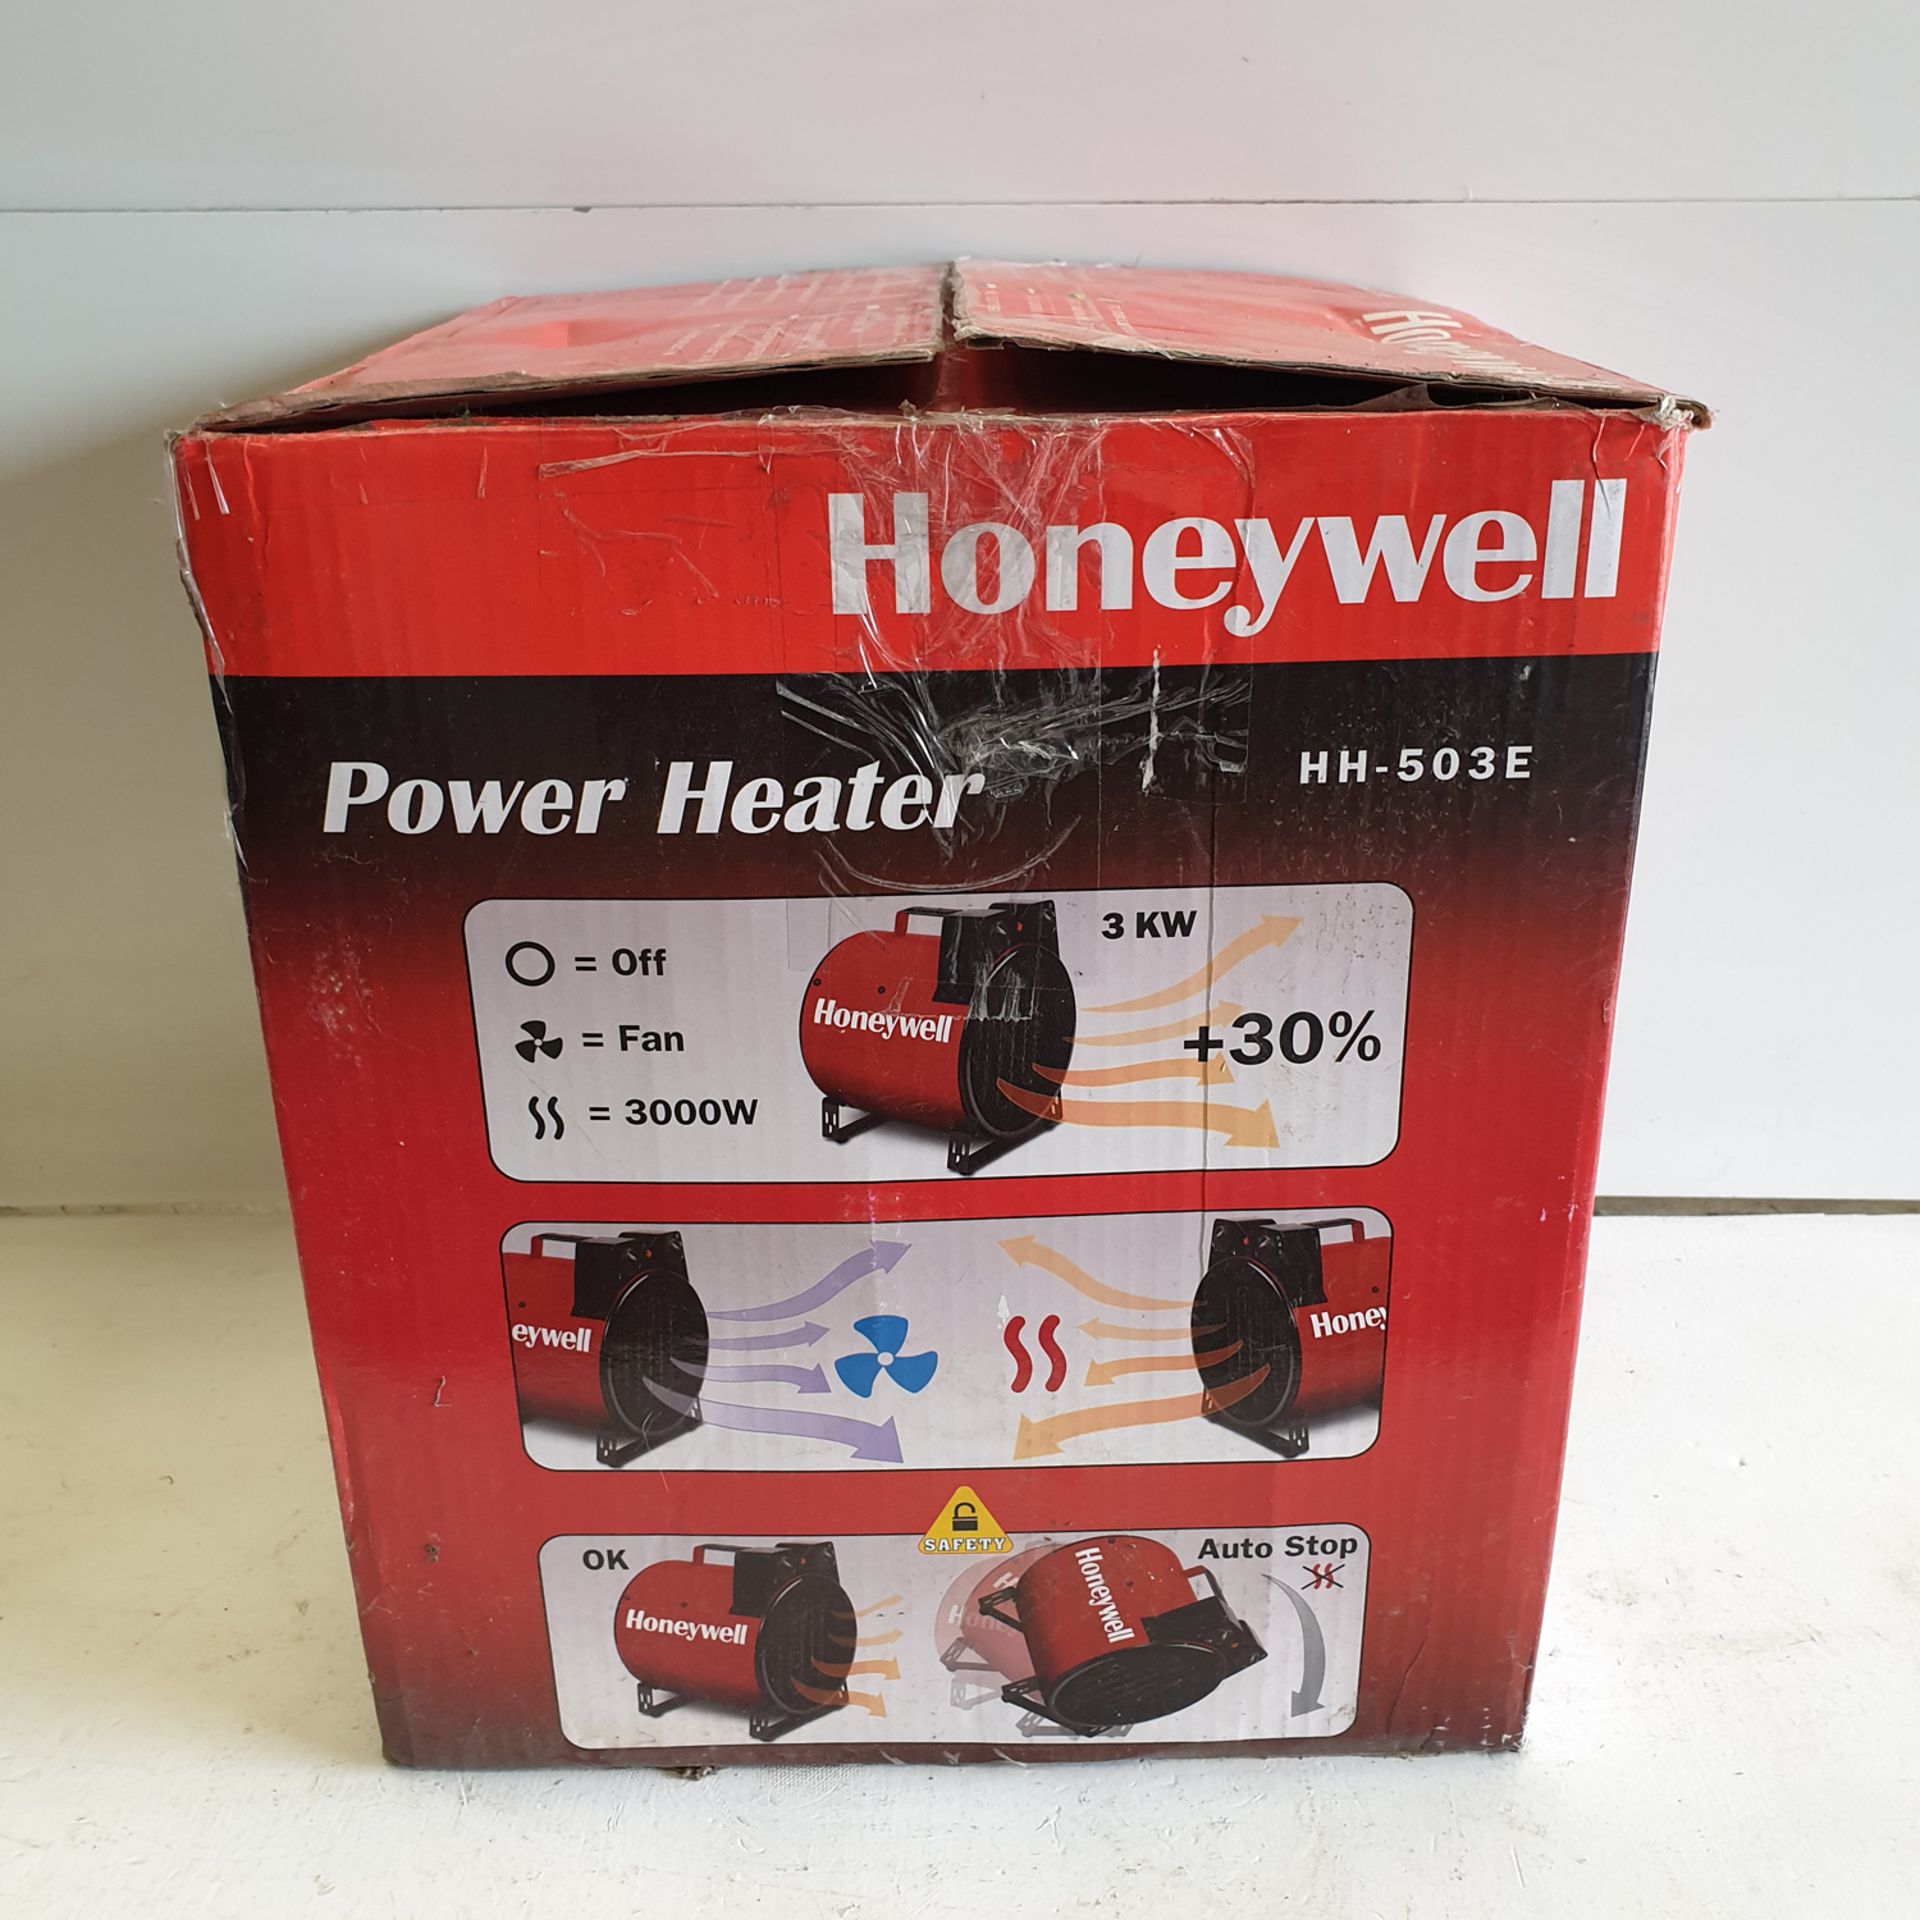 Honeywell Model HH-503E 3KW Power Heater. In Box with Instructions. - Image 3 of 7